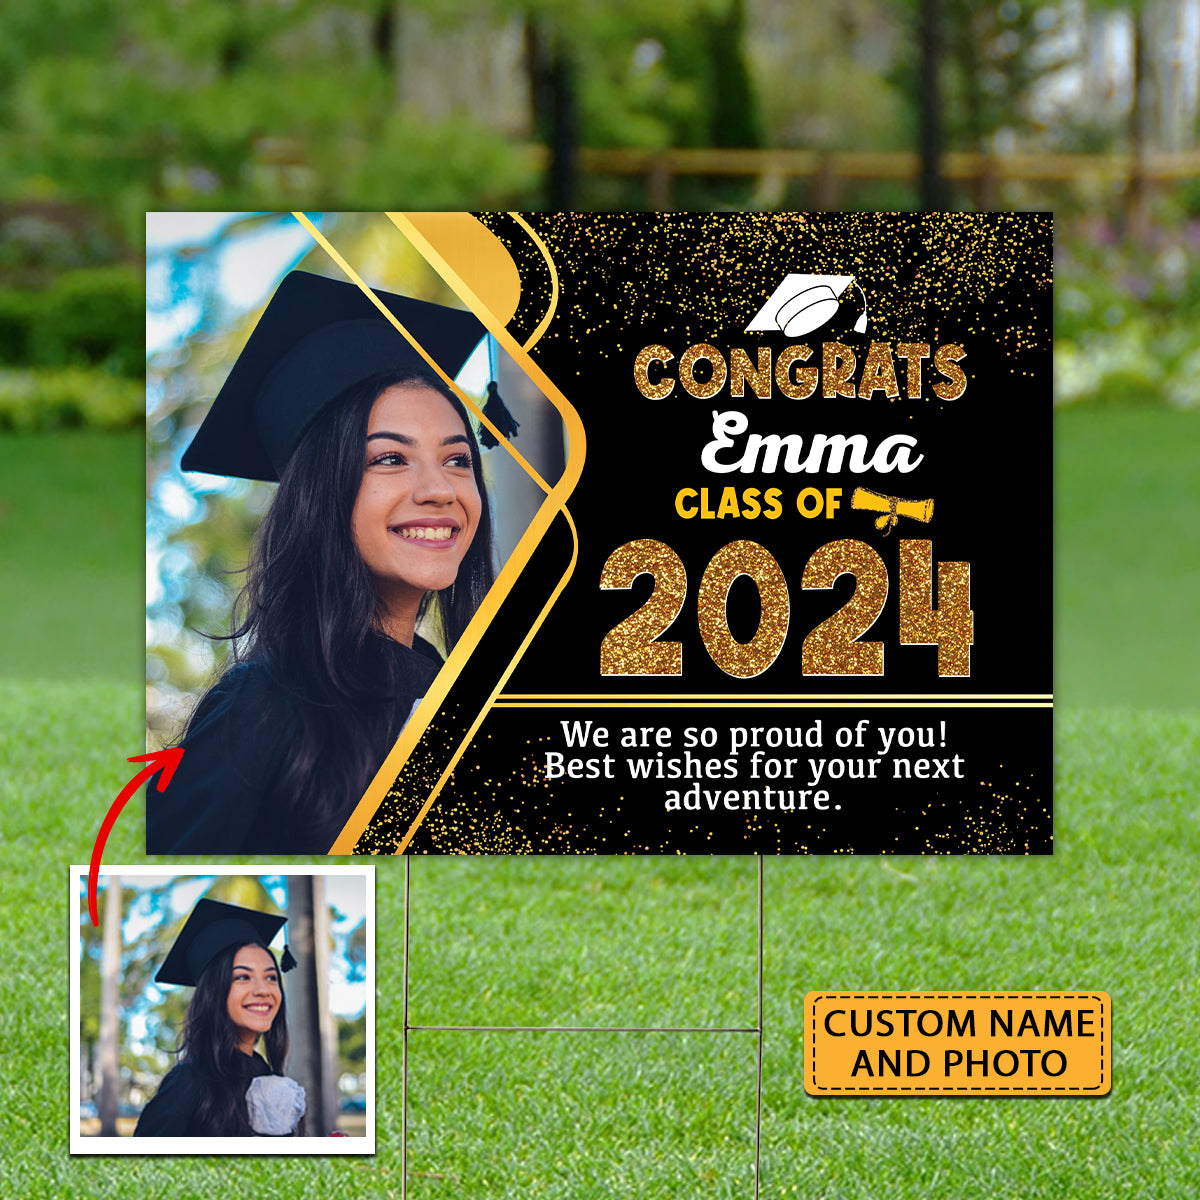 Congrats Class Of 2024, Custom Name And Photo, Personalized Lawn Sign, Yard Sign, Gift For Graduation